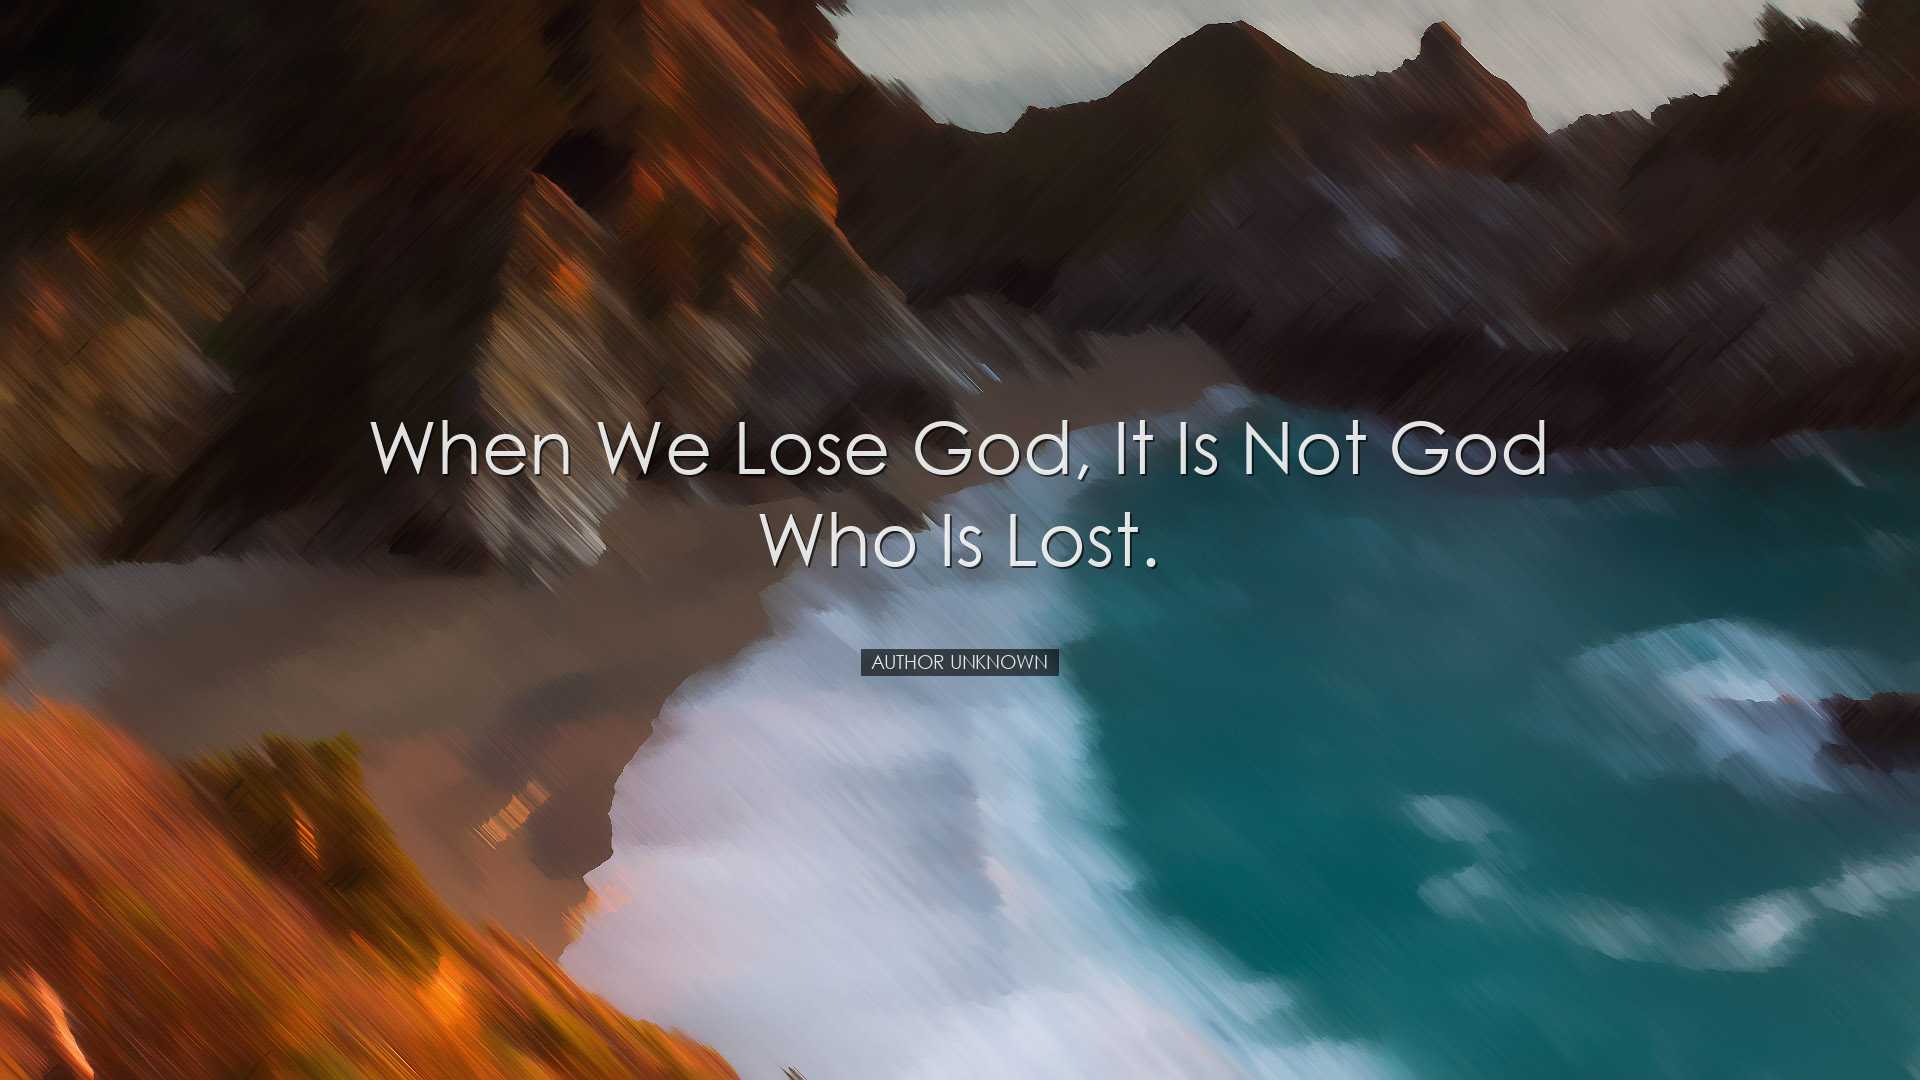 When we lose God, it is not God who is lost. - Author Unknown